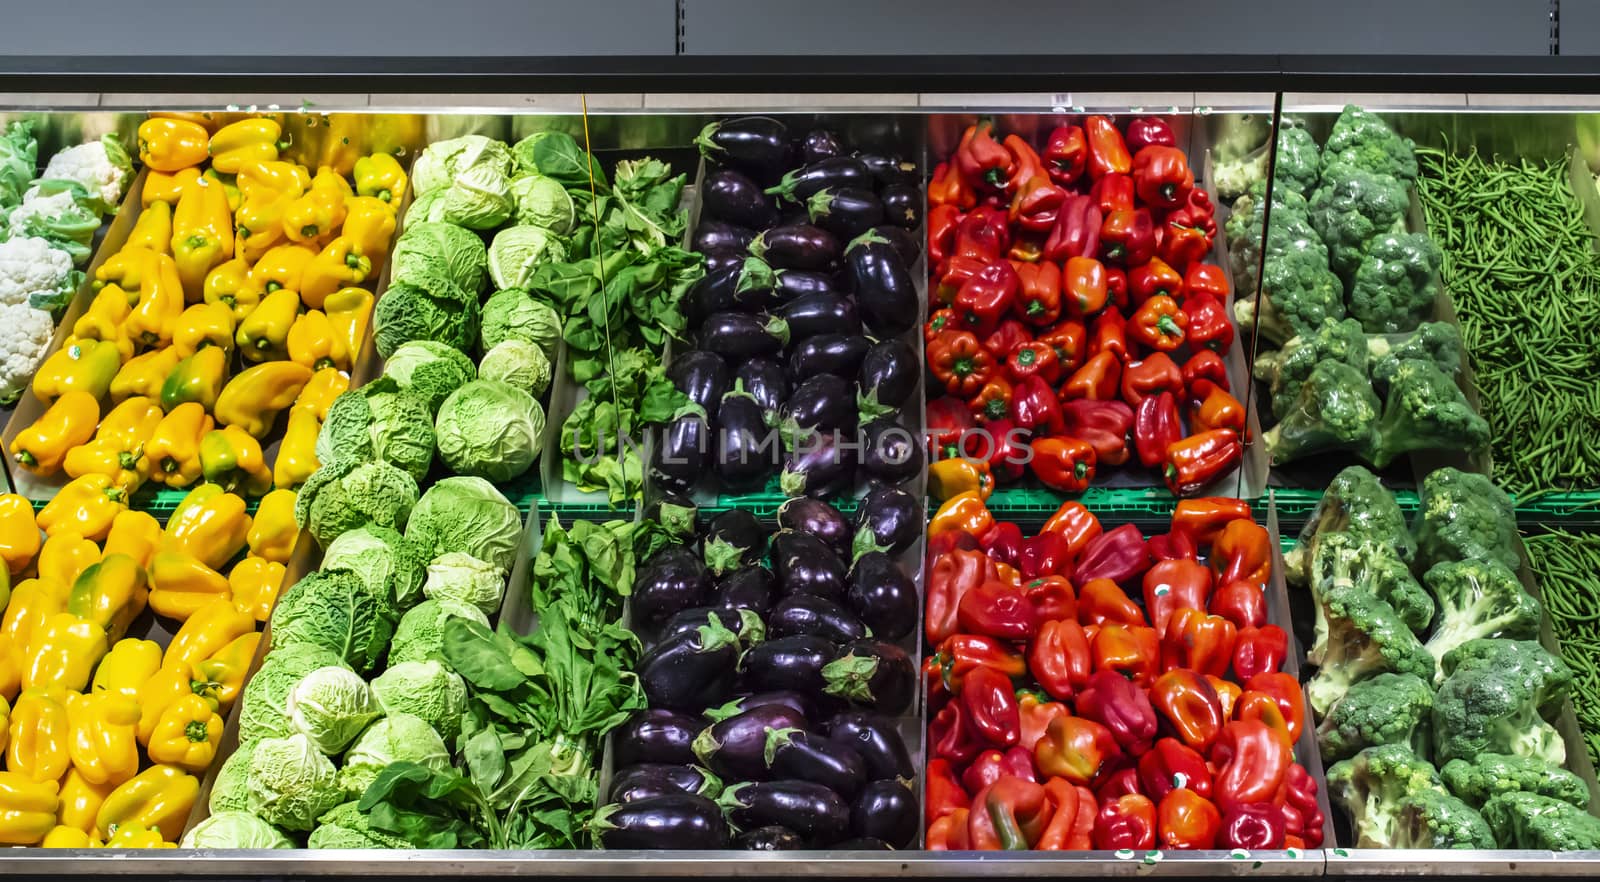 Vegetables on shelf in supermarket.  Peppers, broccoli and beans.